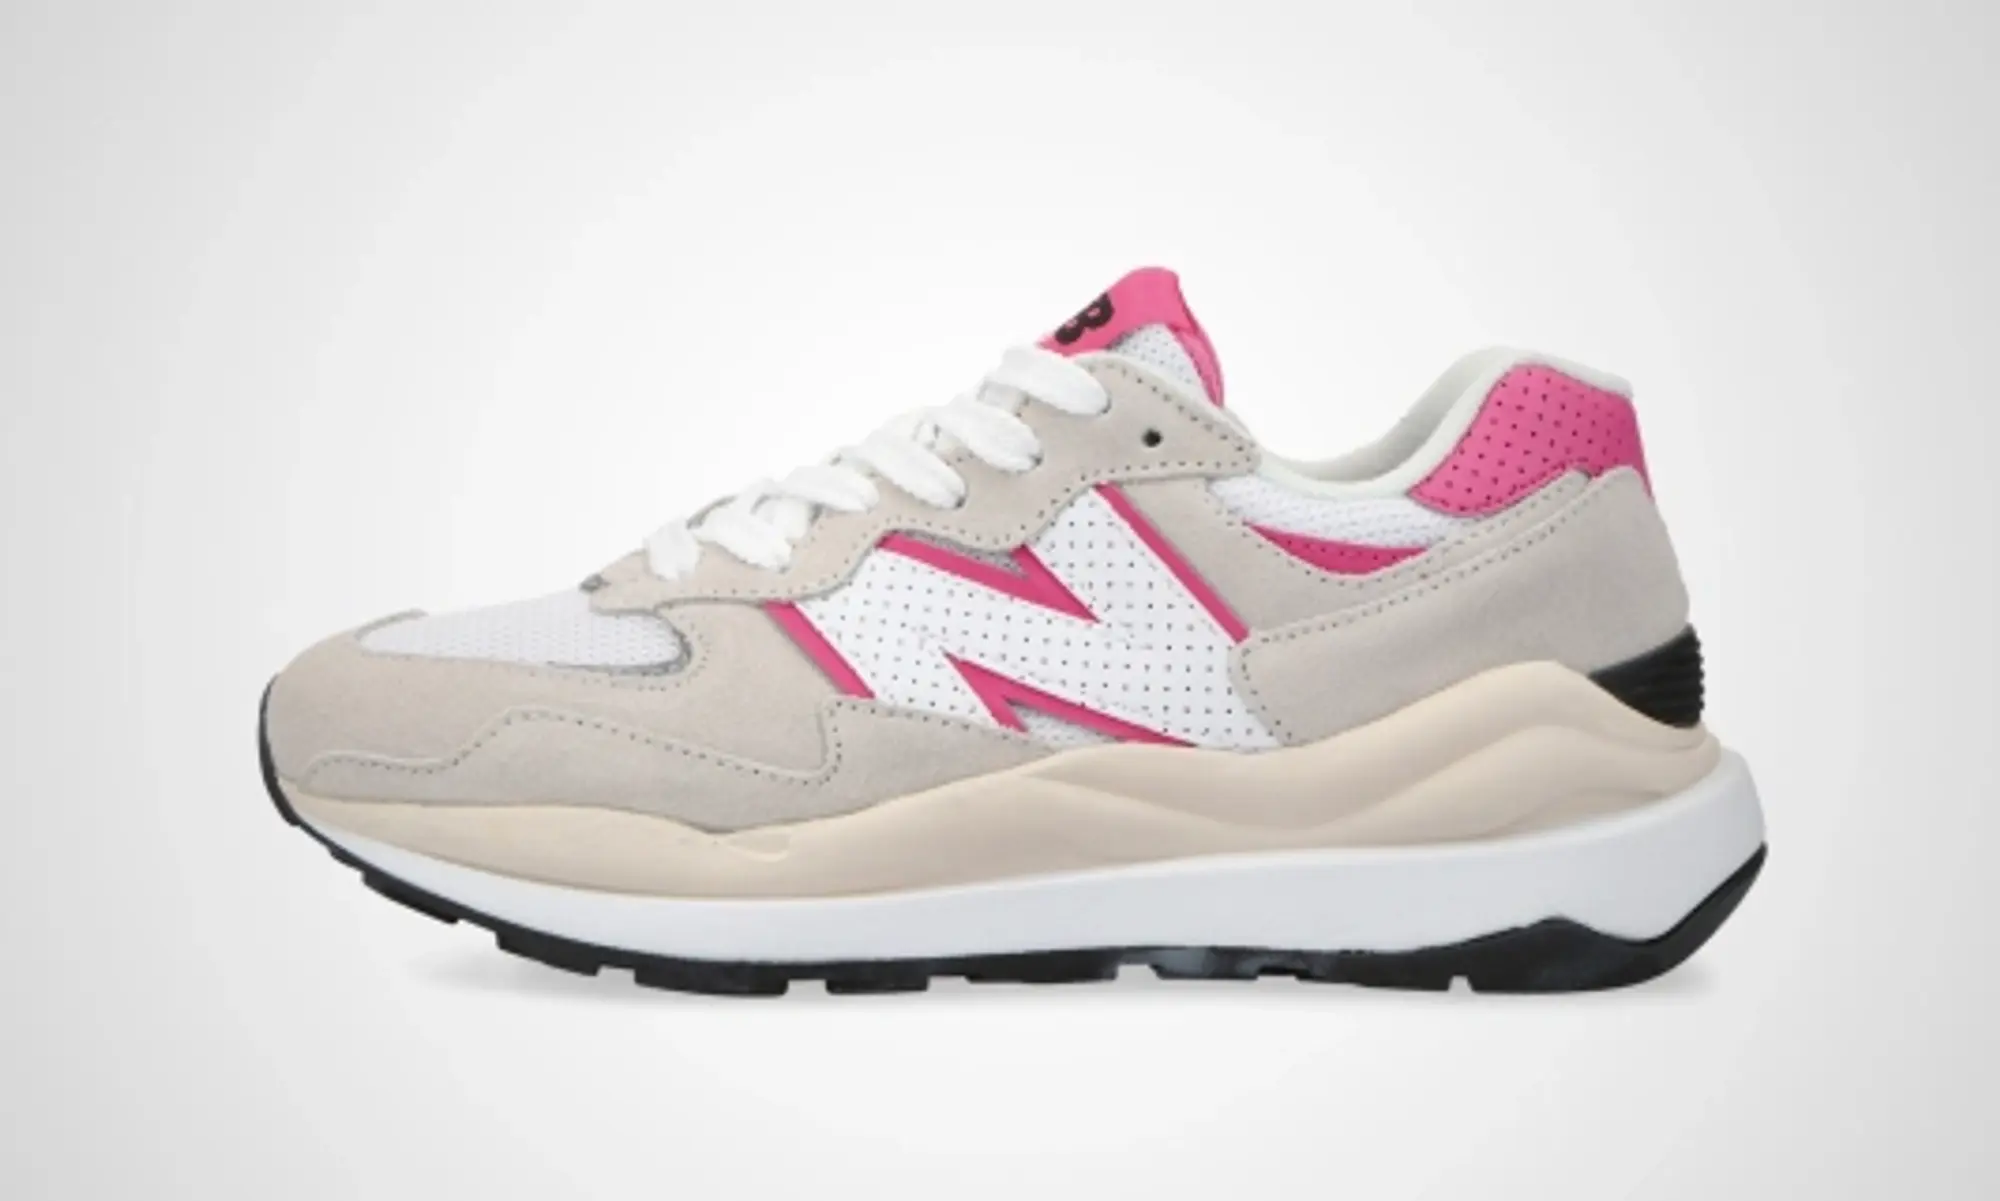 New Balance 57/40 suede trainers in off white and pink